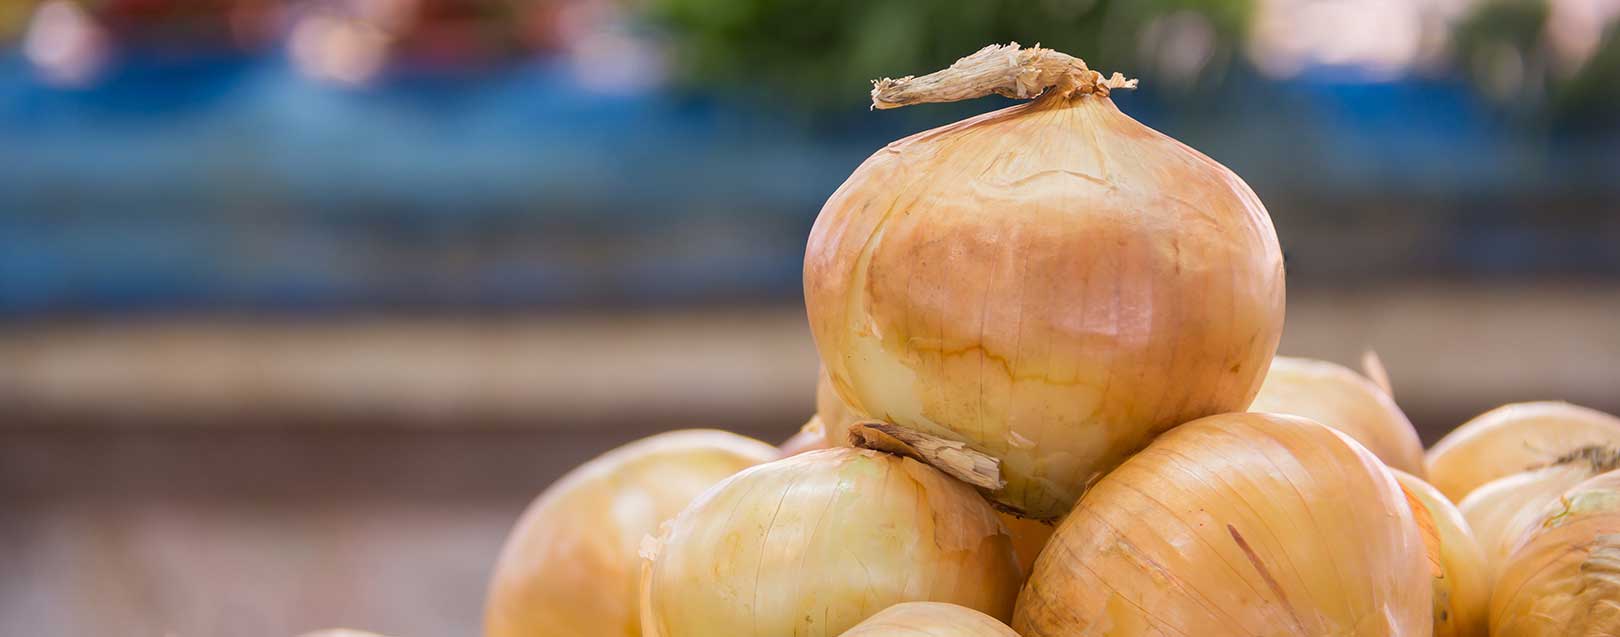 India’s onion exports shot up by 33% in Apr-Feb